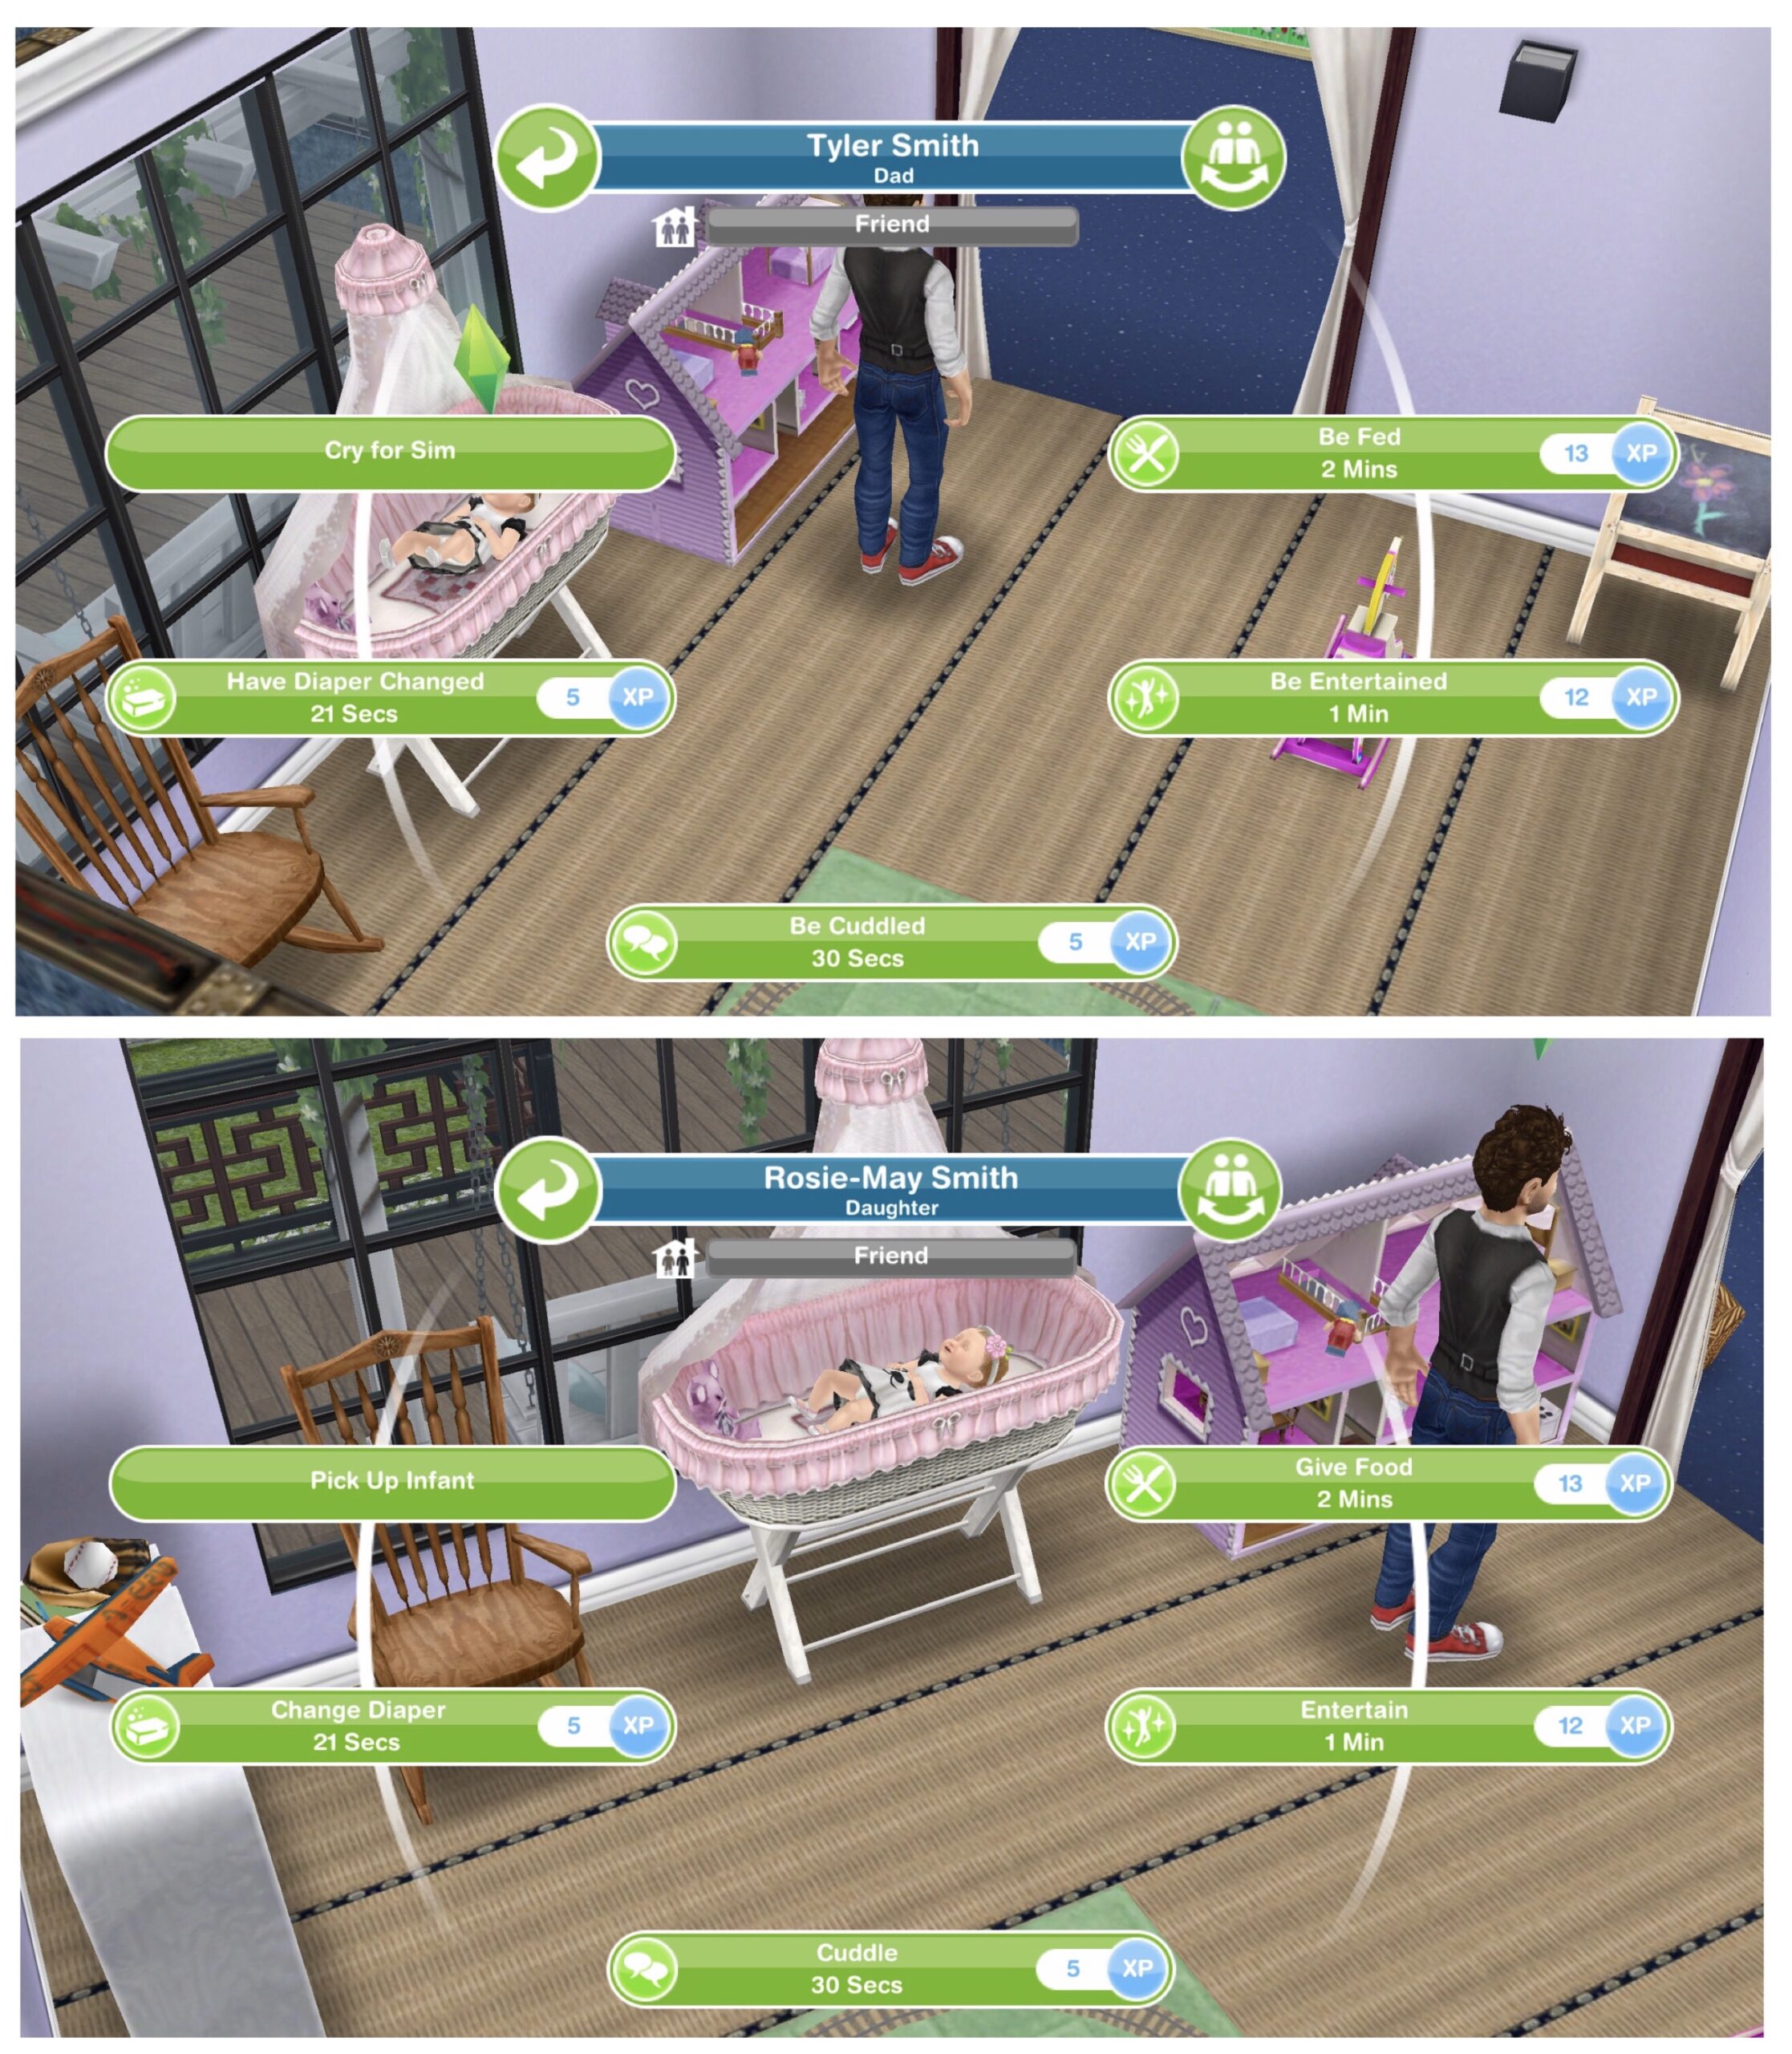 how to get baby to use toilet sims freeplay How to make baby on sims freeplay use the bathroom